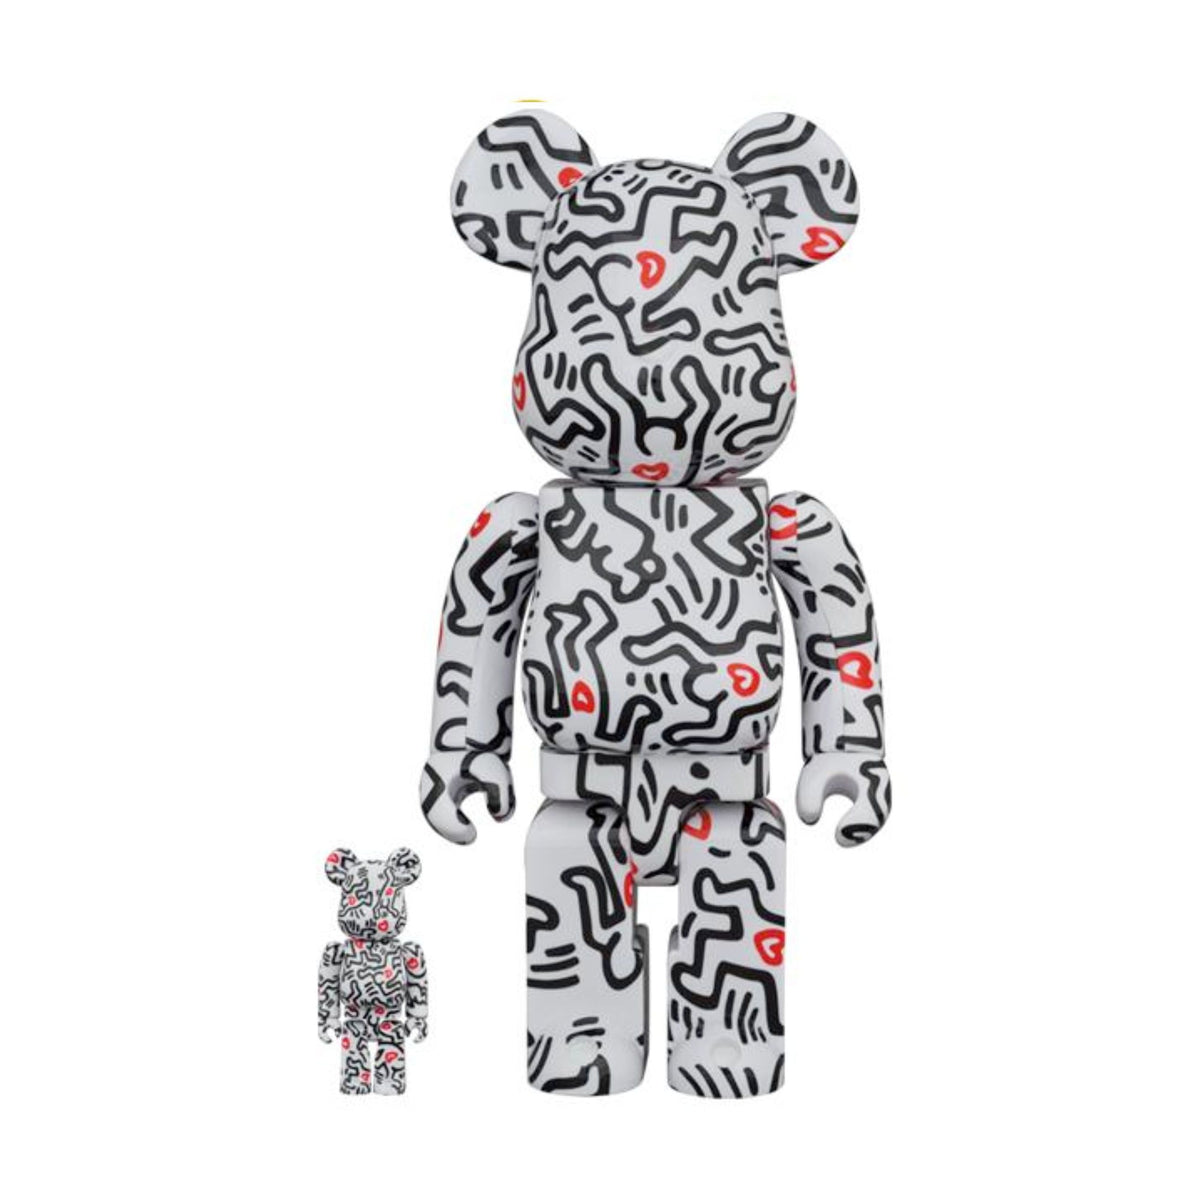 Bearbrick Keith Haring #8 100% & 400% – Uncommonhk_official